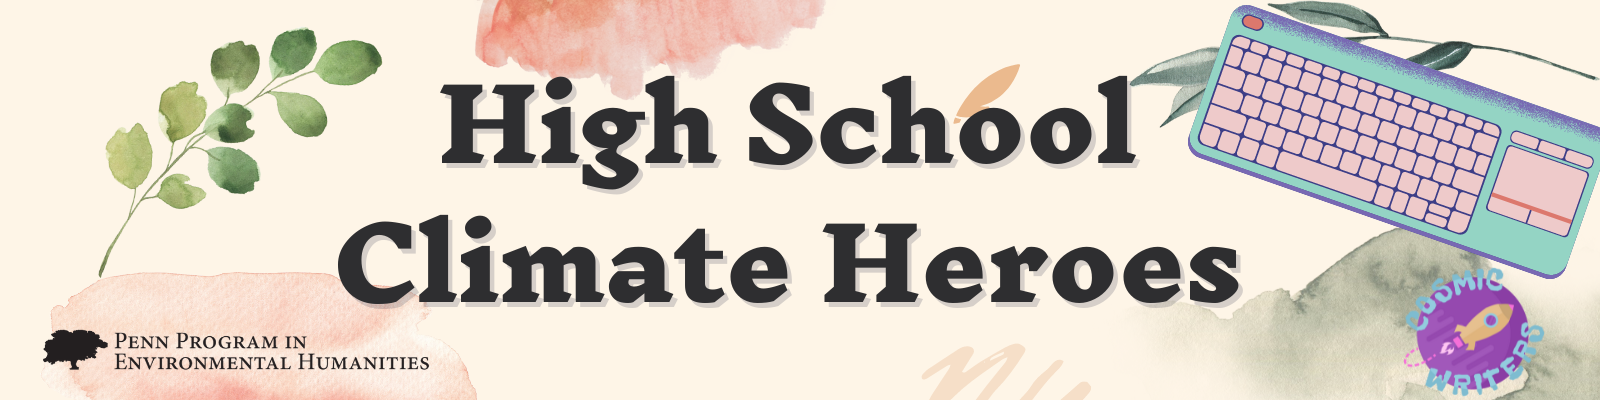 a keyboard and leaves with the text "High school climate heroes"